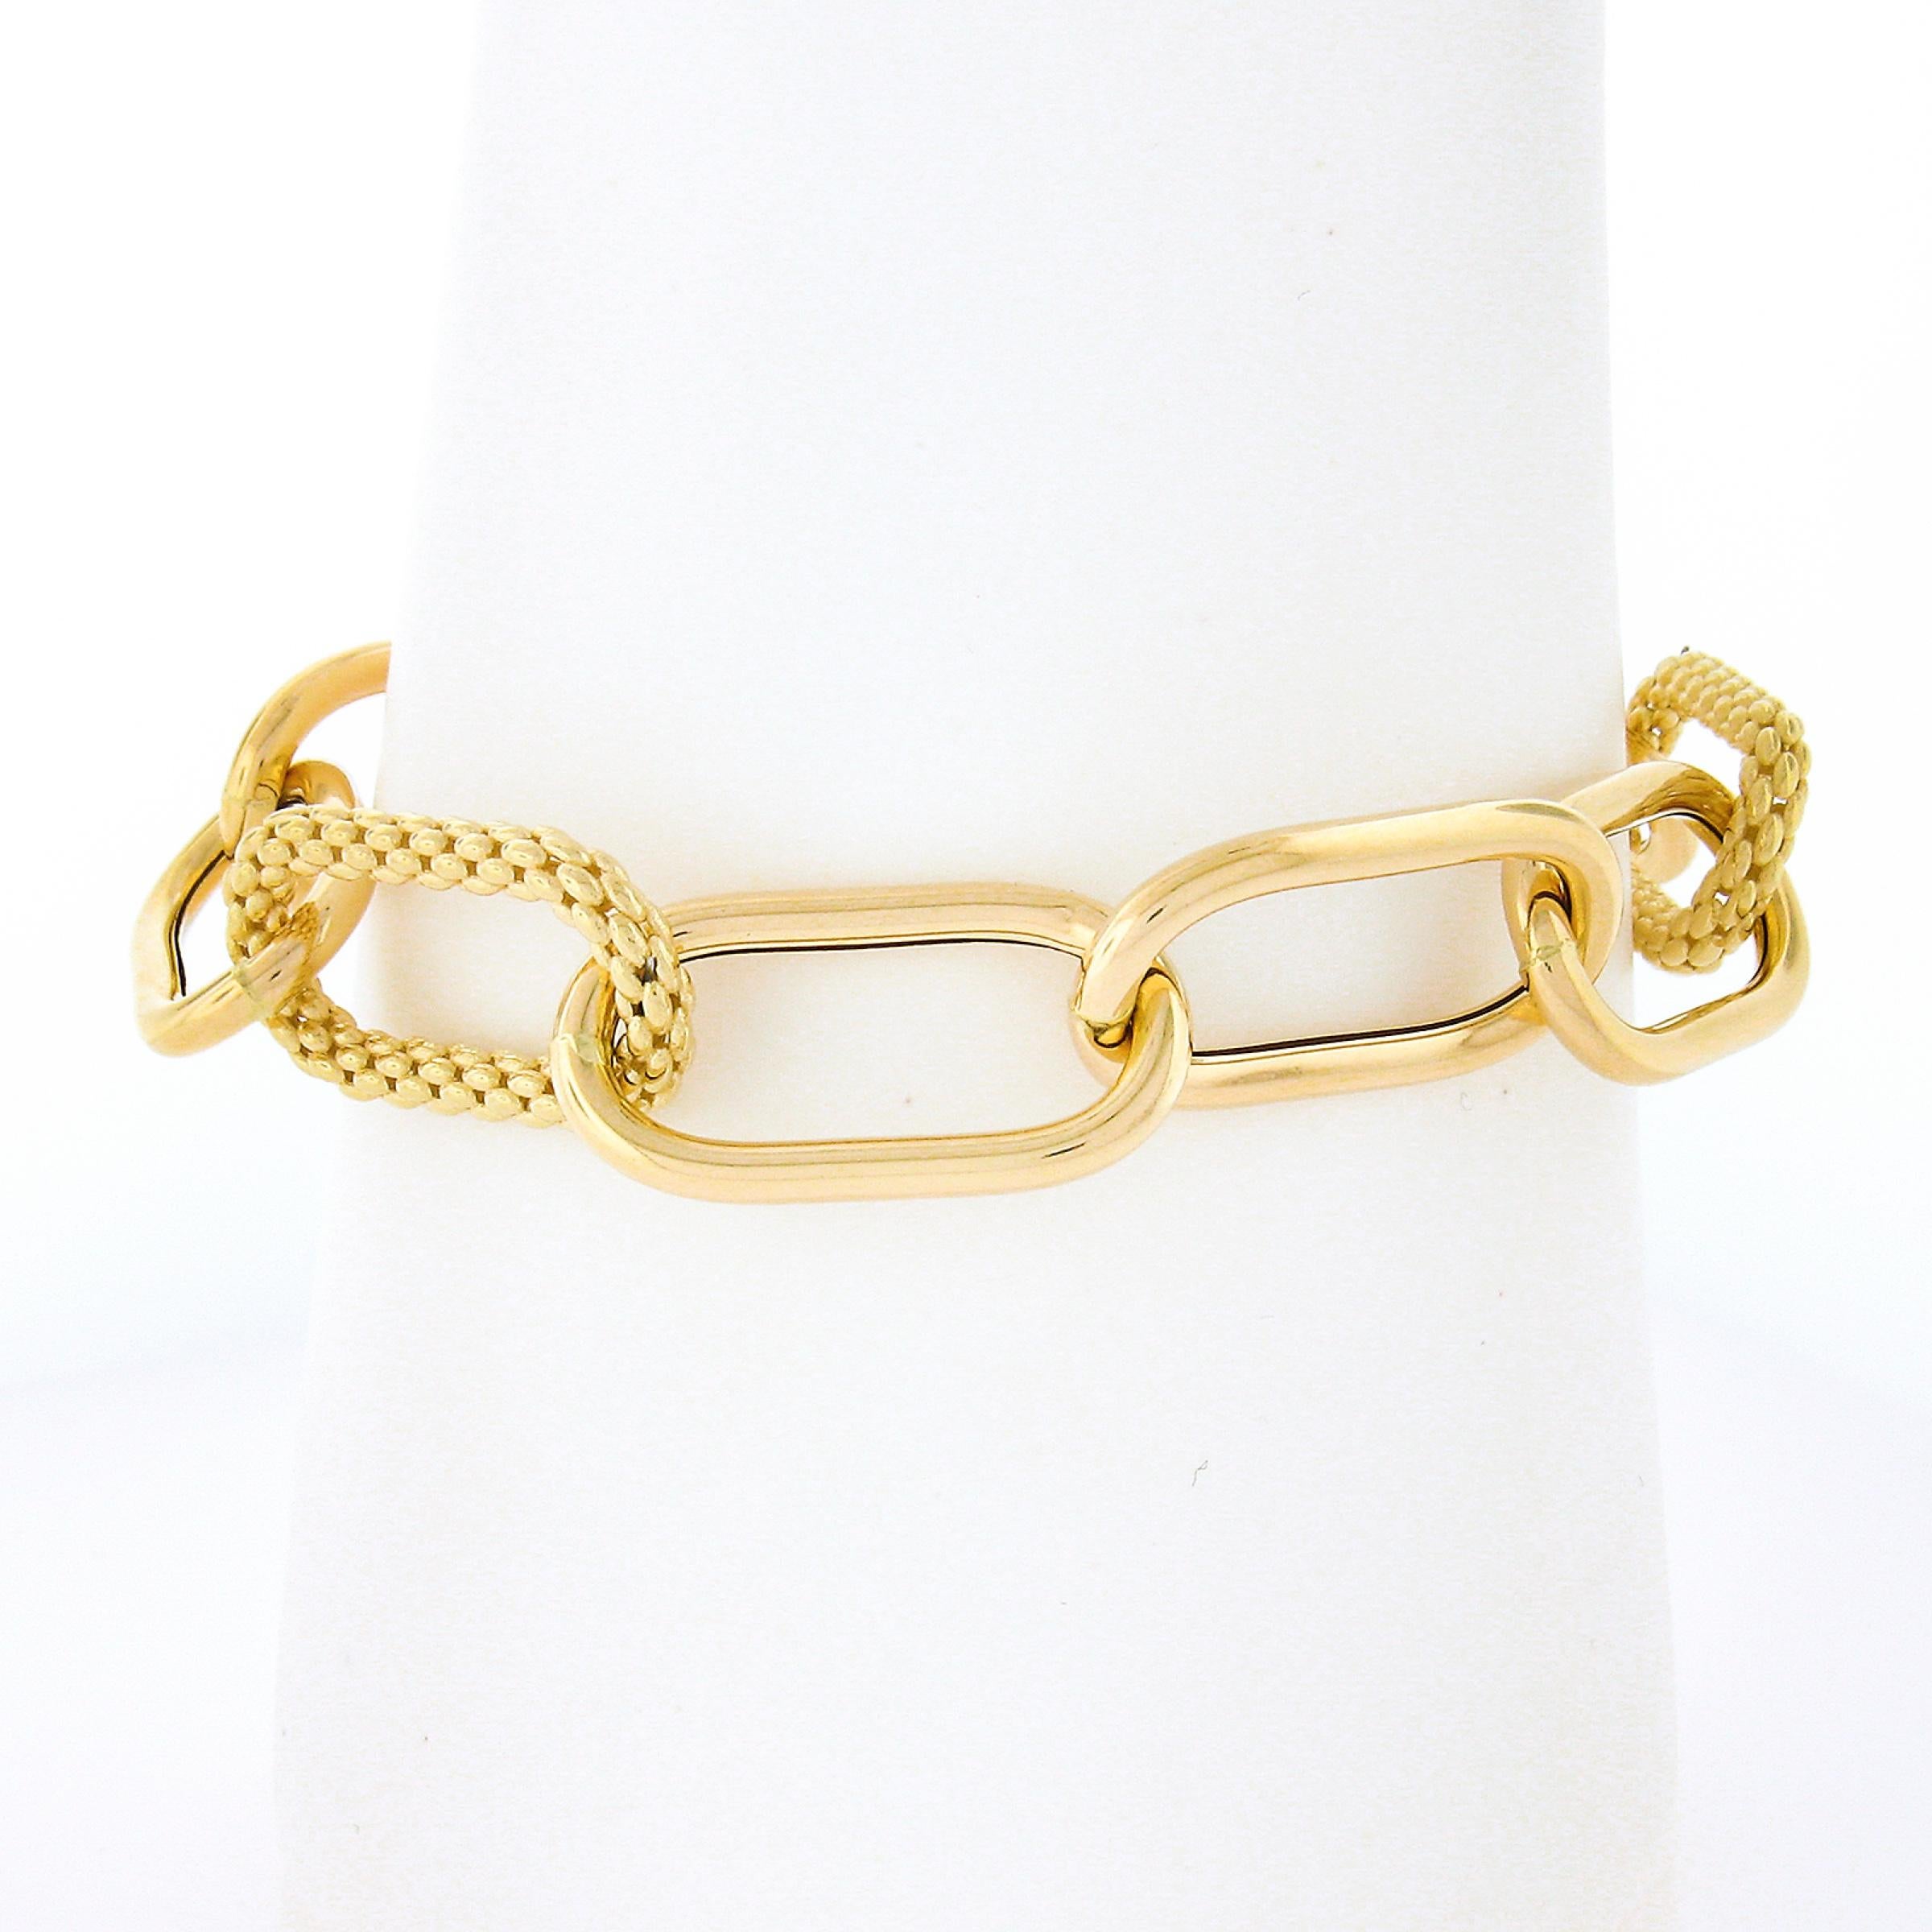 This wide and large paperclip link bracelet is crafted in solid 18k yellow and features plain and weave textured links that hollow in design which gives makes the bracelet its large and big show. It is secured with an oversized spring ring clasp